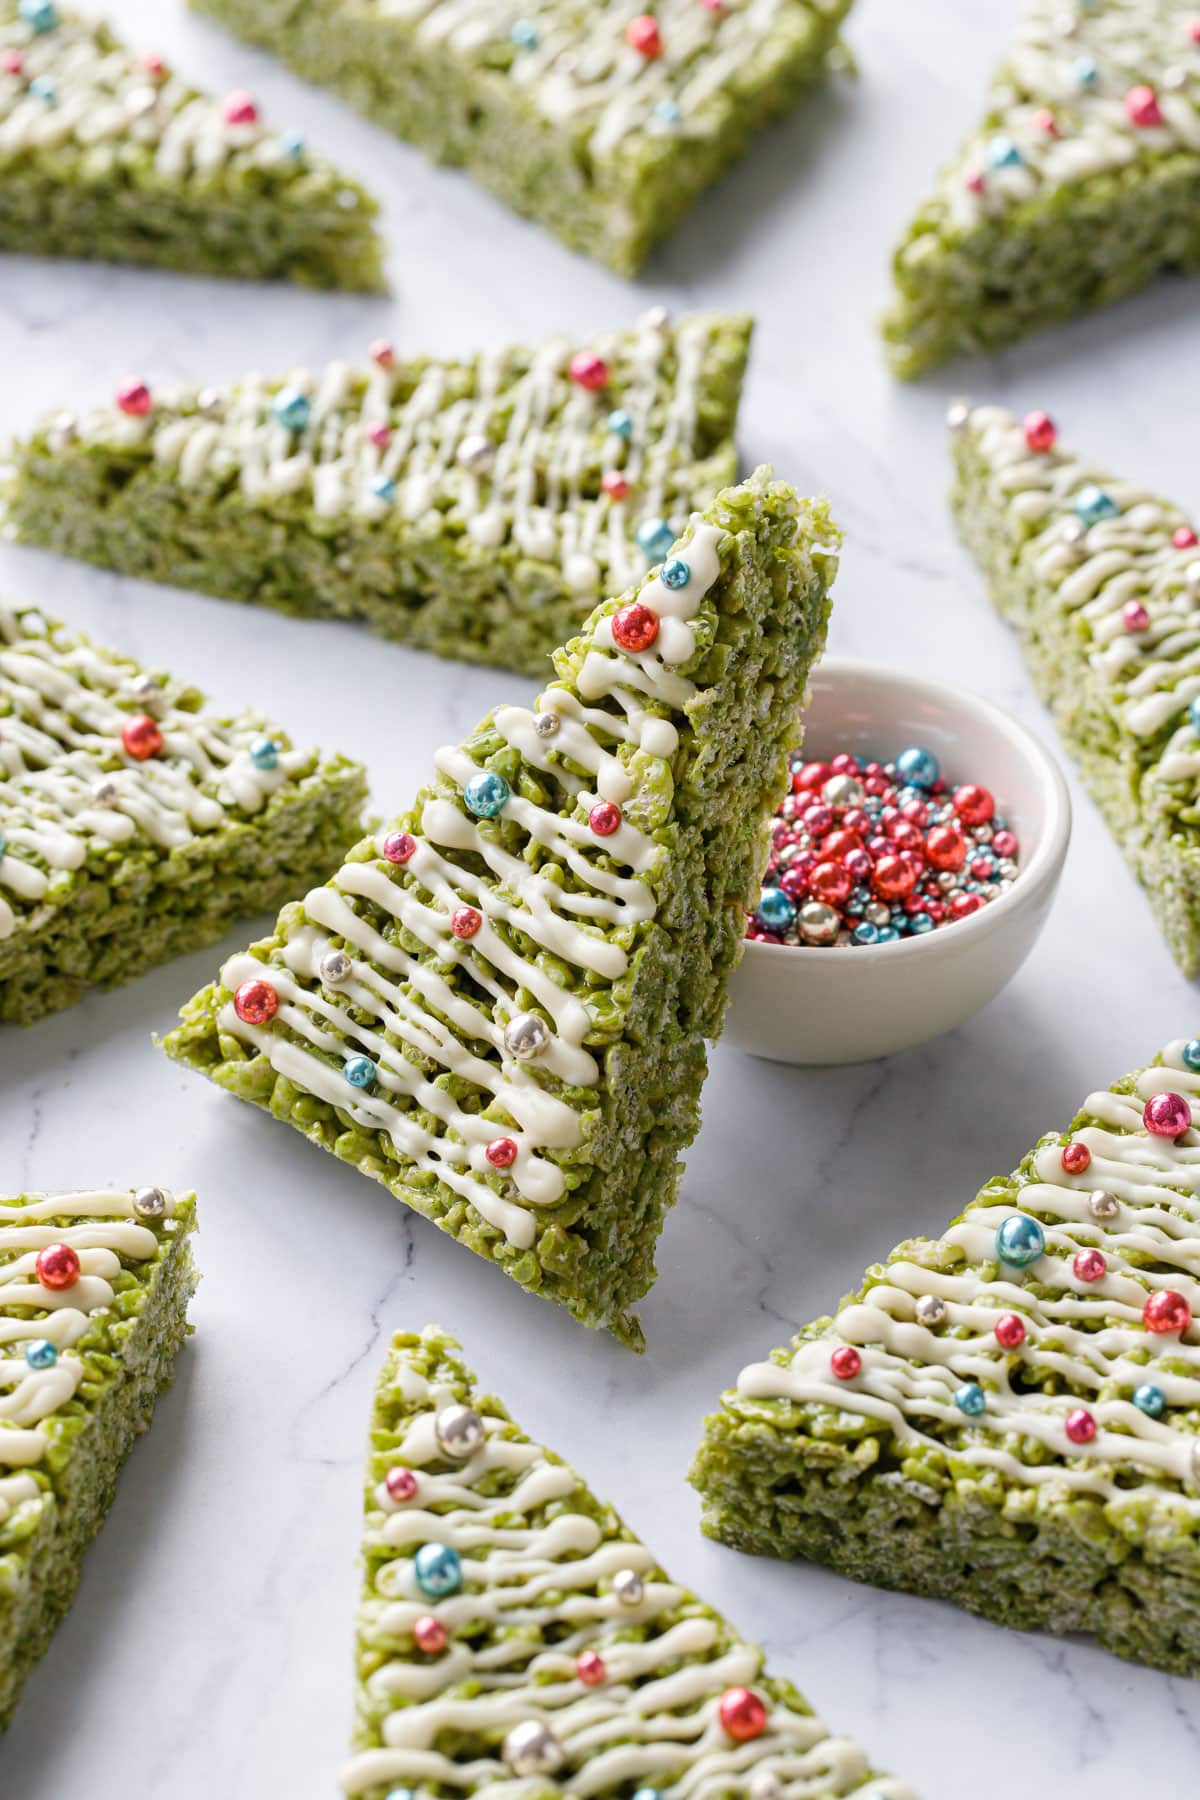 Matcha Rice Crispy Treats cut into triangles and decorated like Christmas trees, one leaning up against a bowl of metallic sprinkles on a marble background.